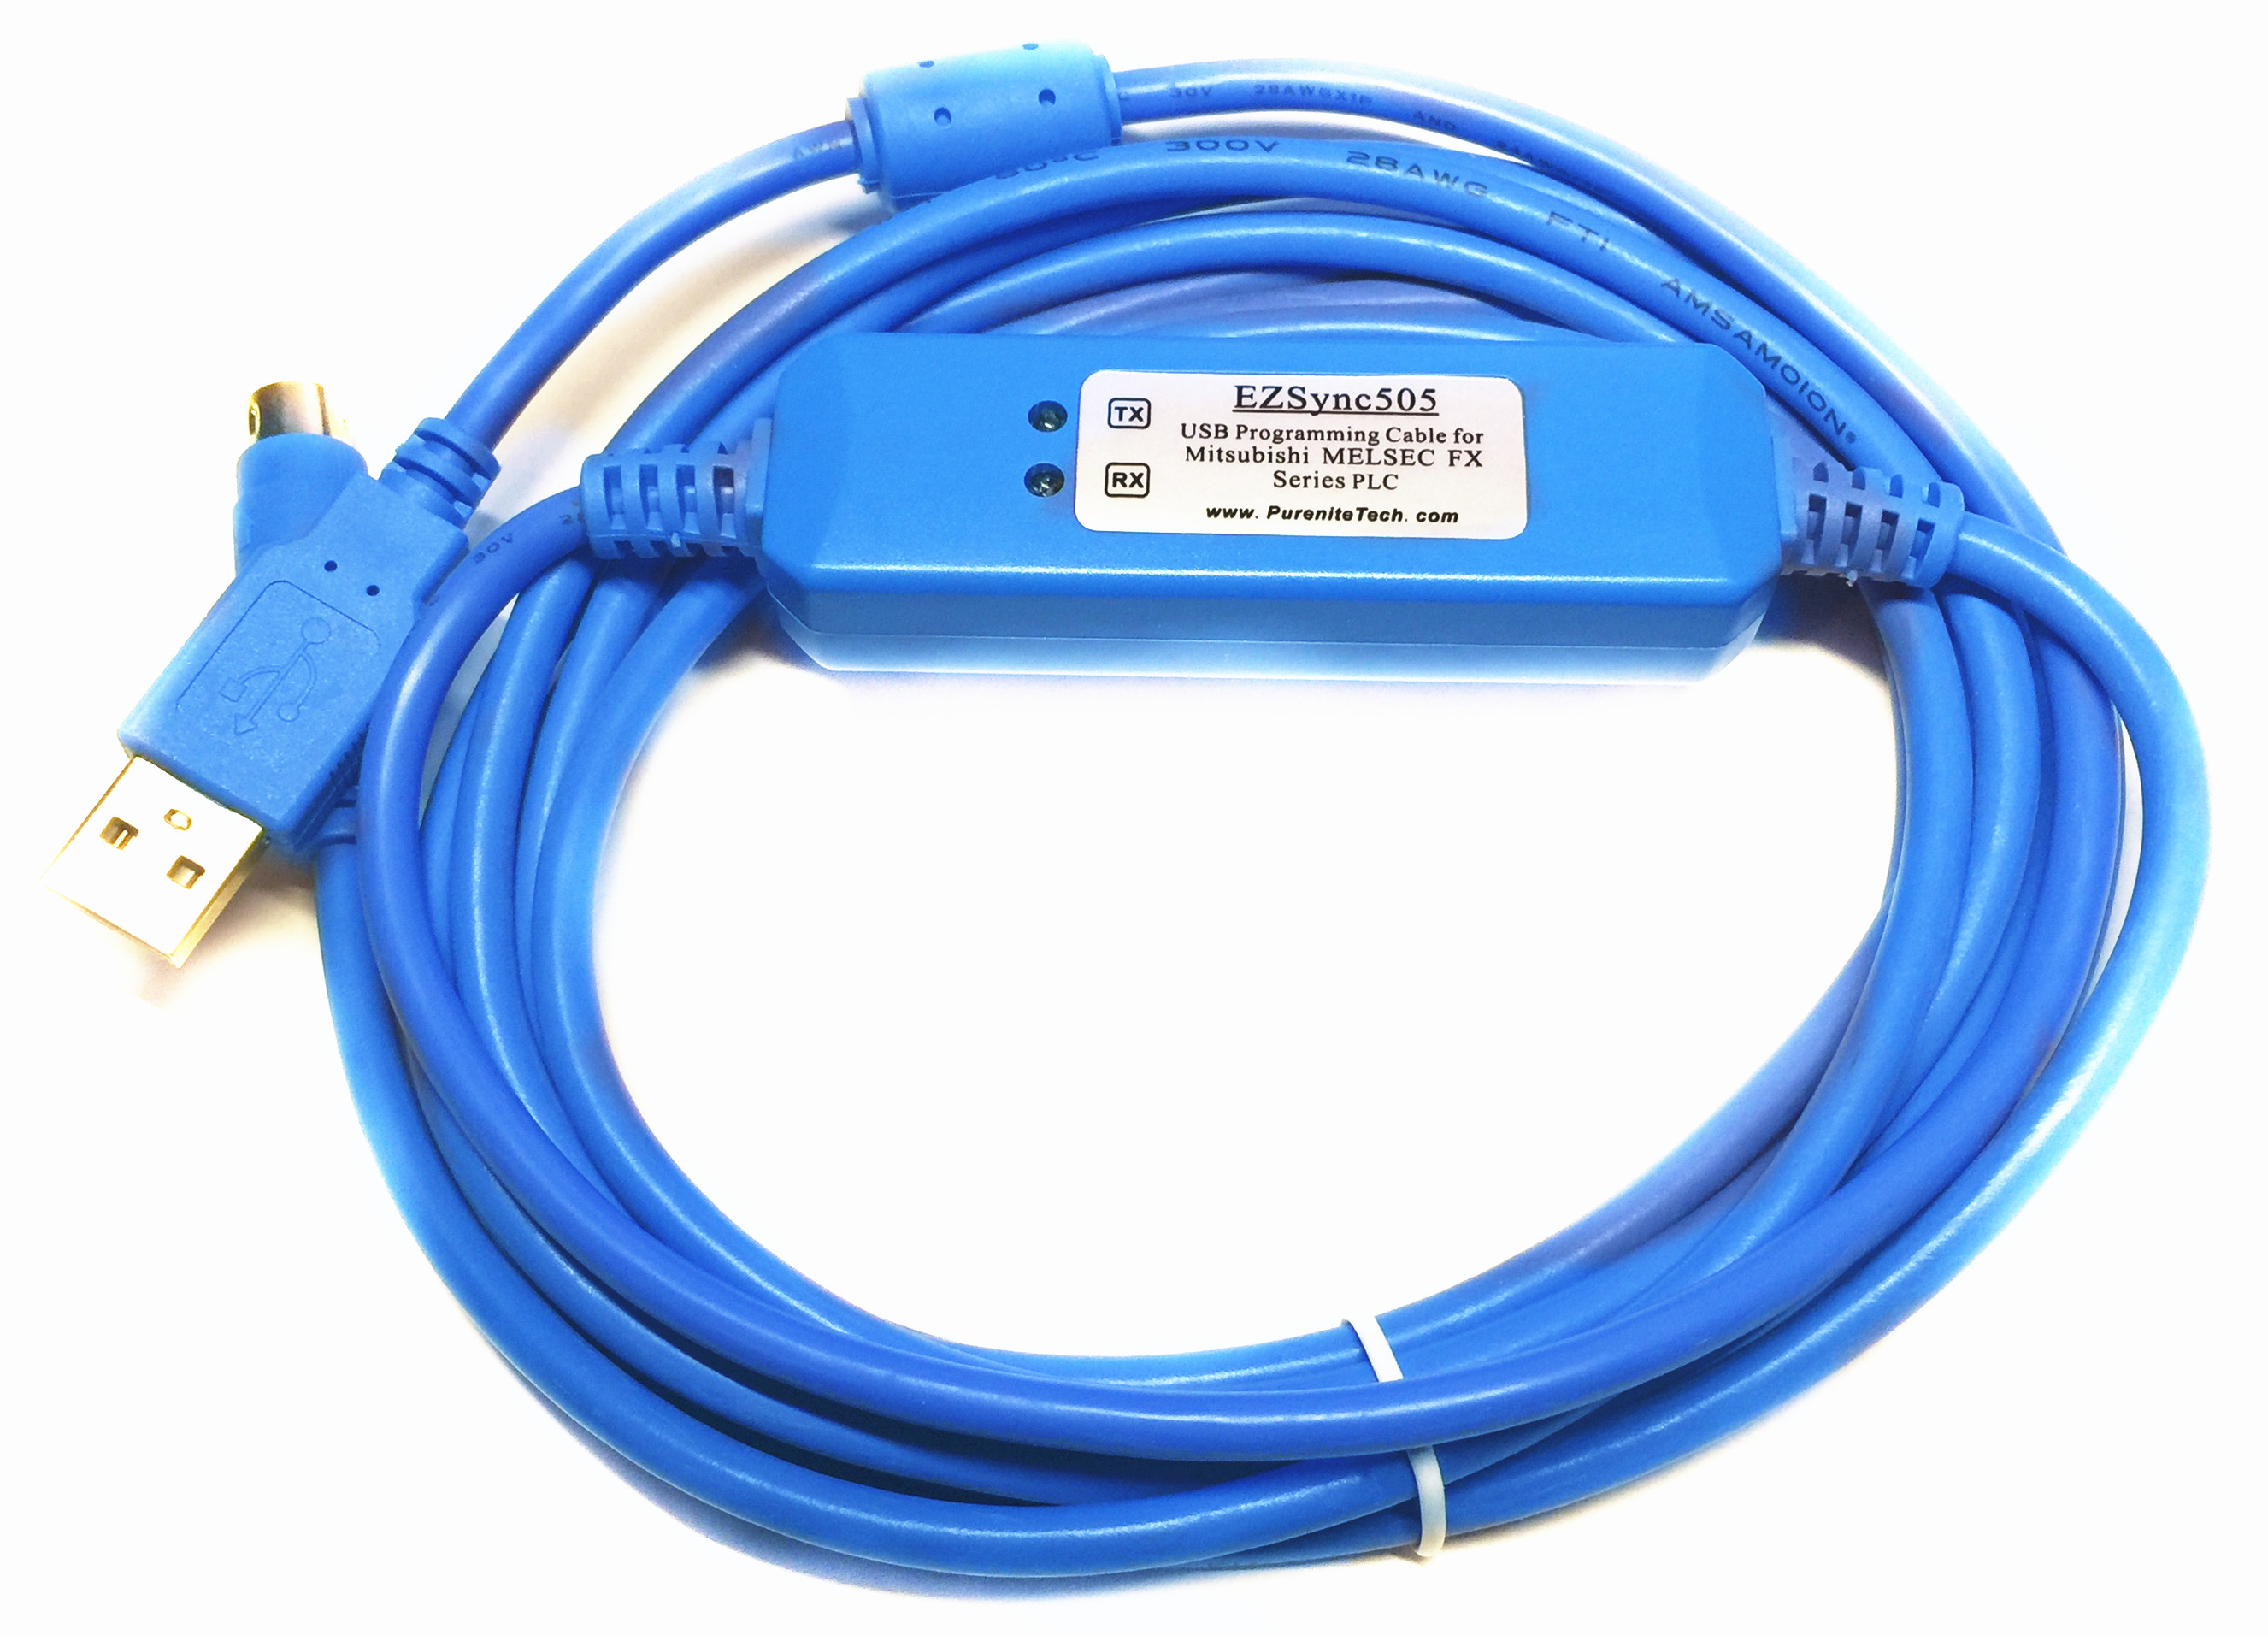 SC09 SC-09 Cable RS232 to RS422 adapter for Mitsubishi MELSEC FX & A series PLC Sell one like this SC09 SC-09 Cable RS232 to RS422 adapter for Mitsubishi MELSEC FX & A series PLCRED